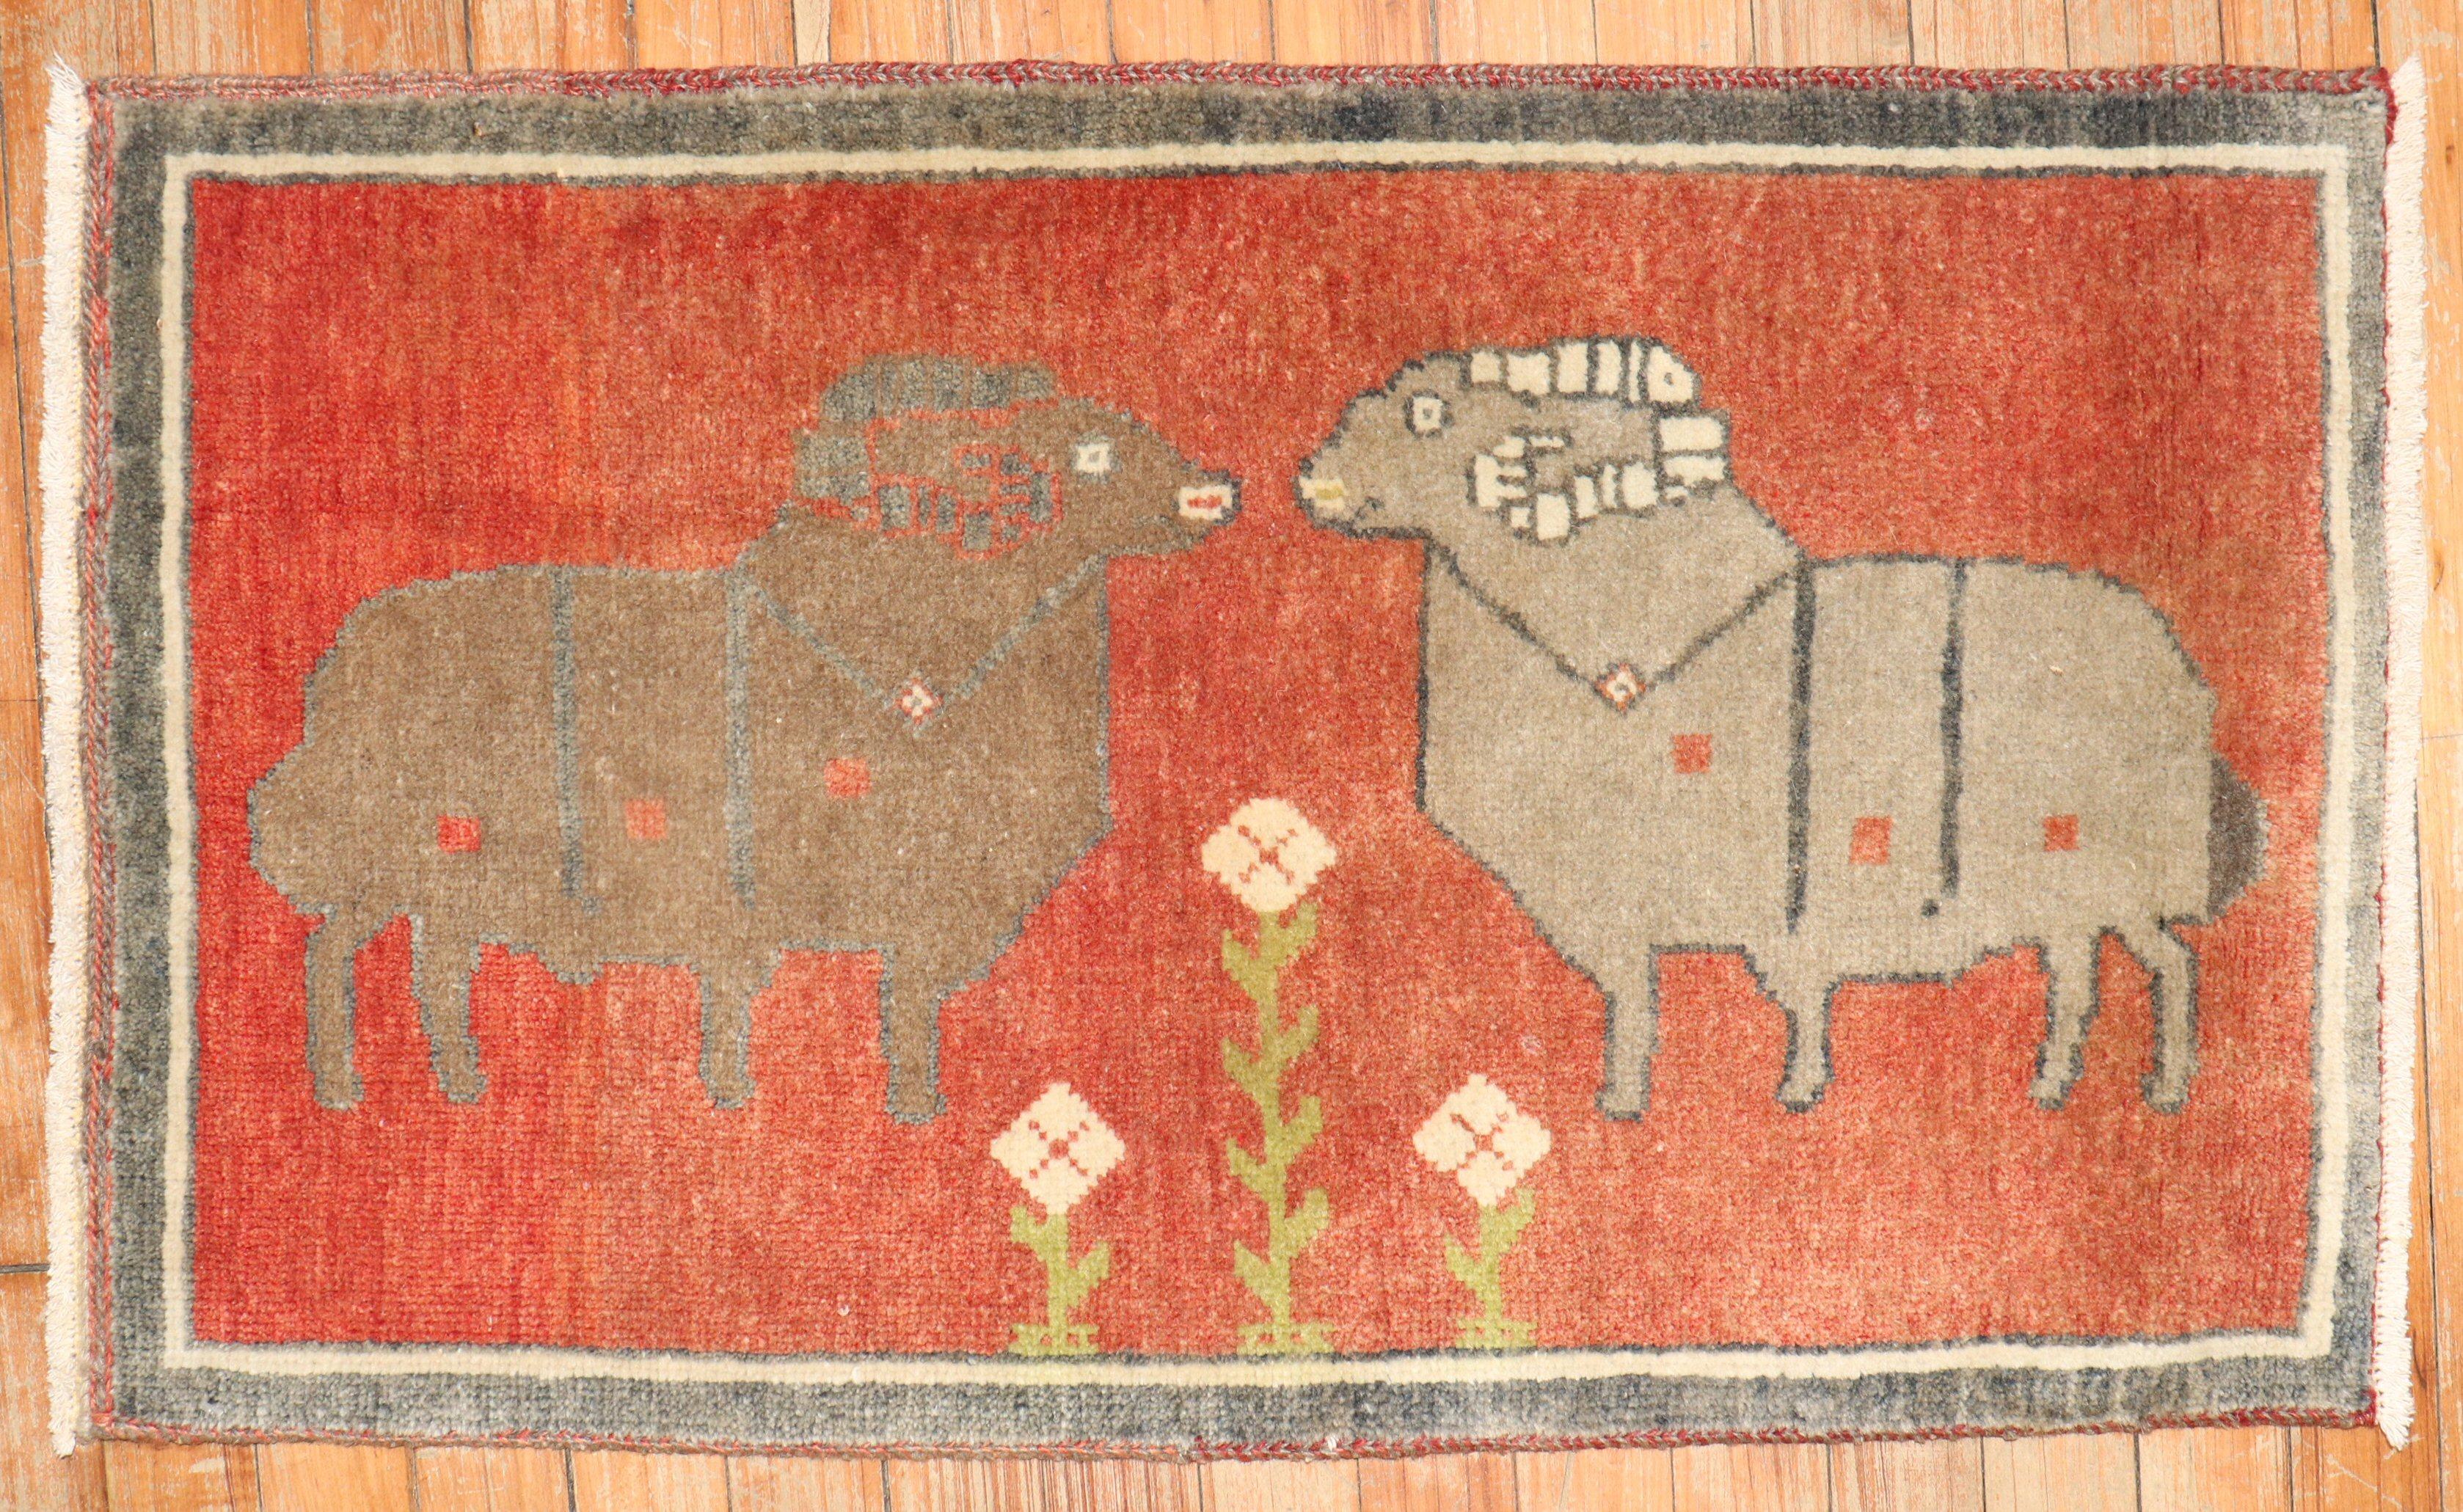 mid 20th Century Turkish Pictorial Rug with 2 sheep rams on a red field

Details
rug no.	31797
size	1' 8